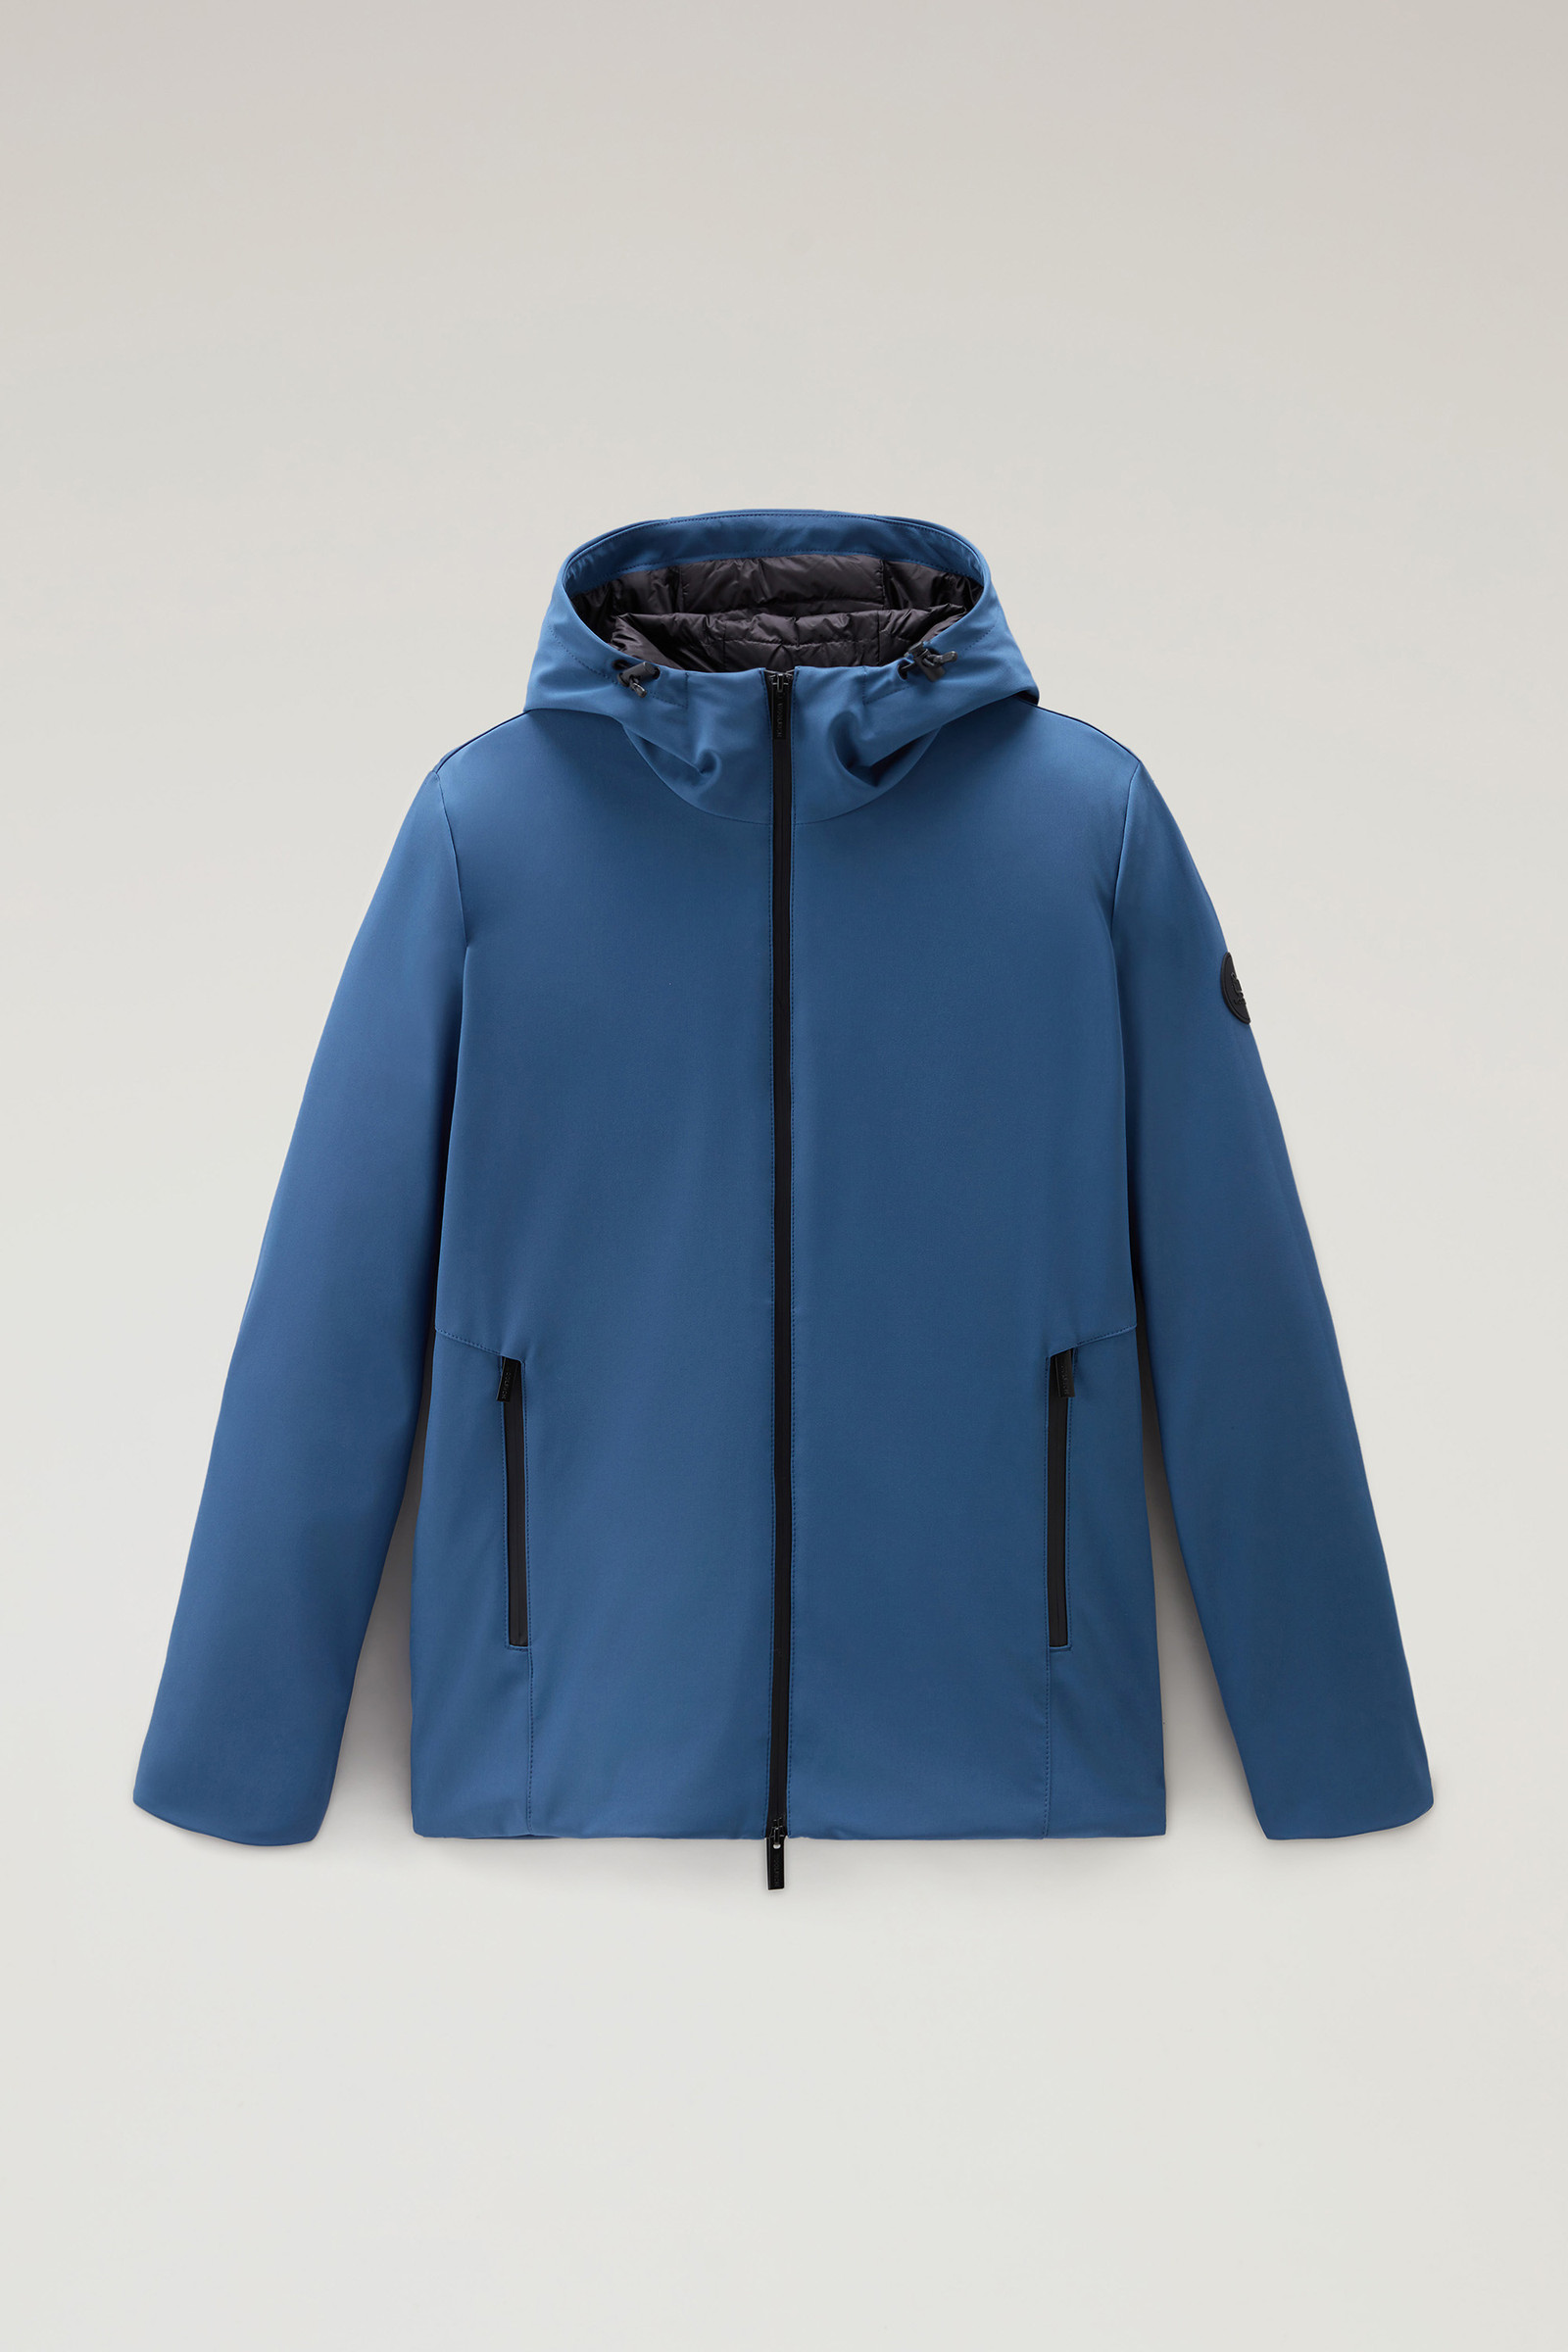 Men's Pacific Jacket in Tech Softshell Blue | Woolrich USA